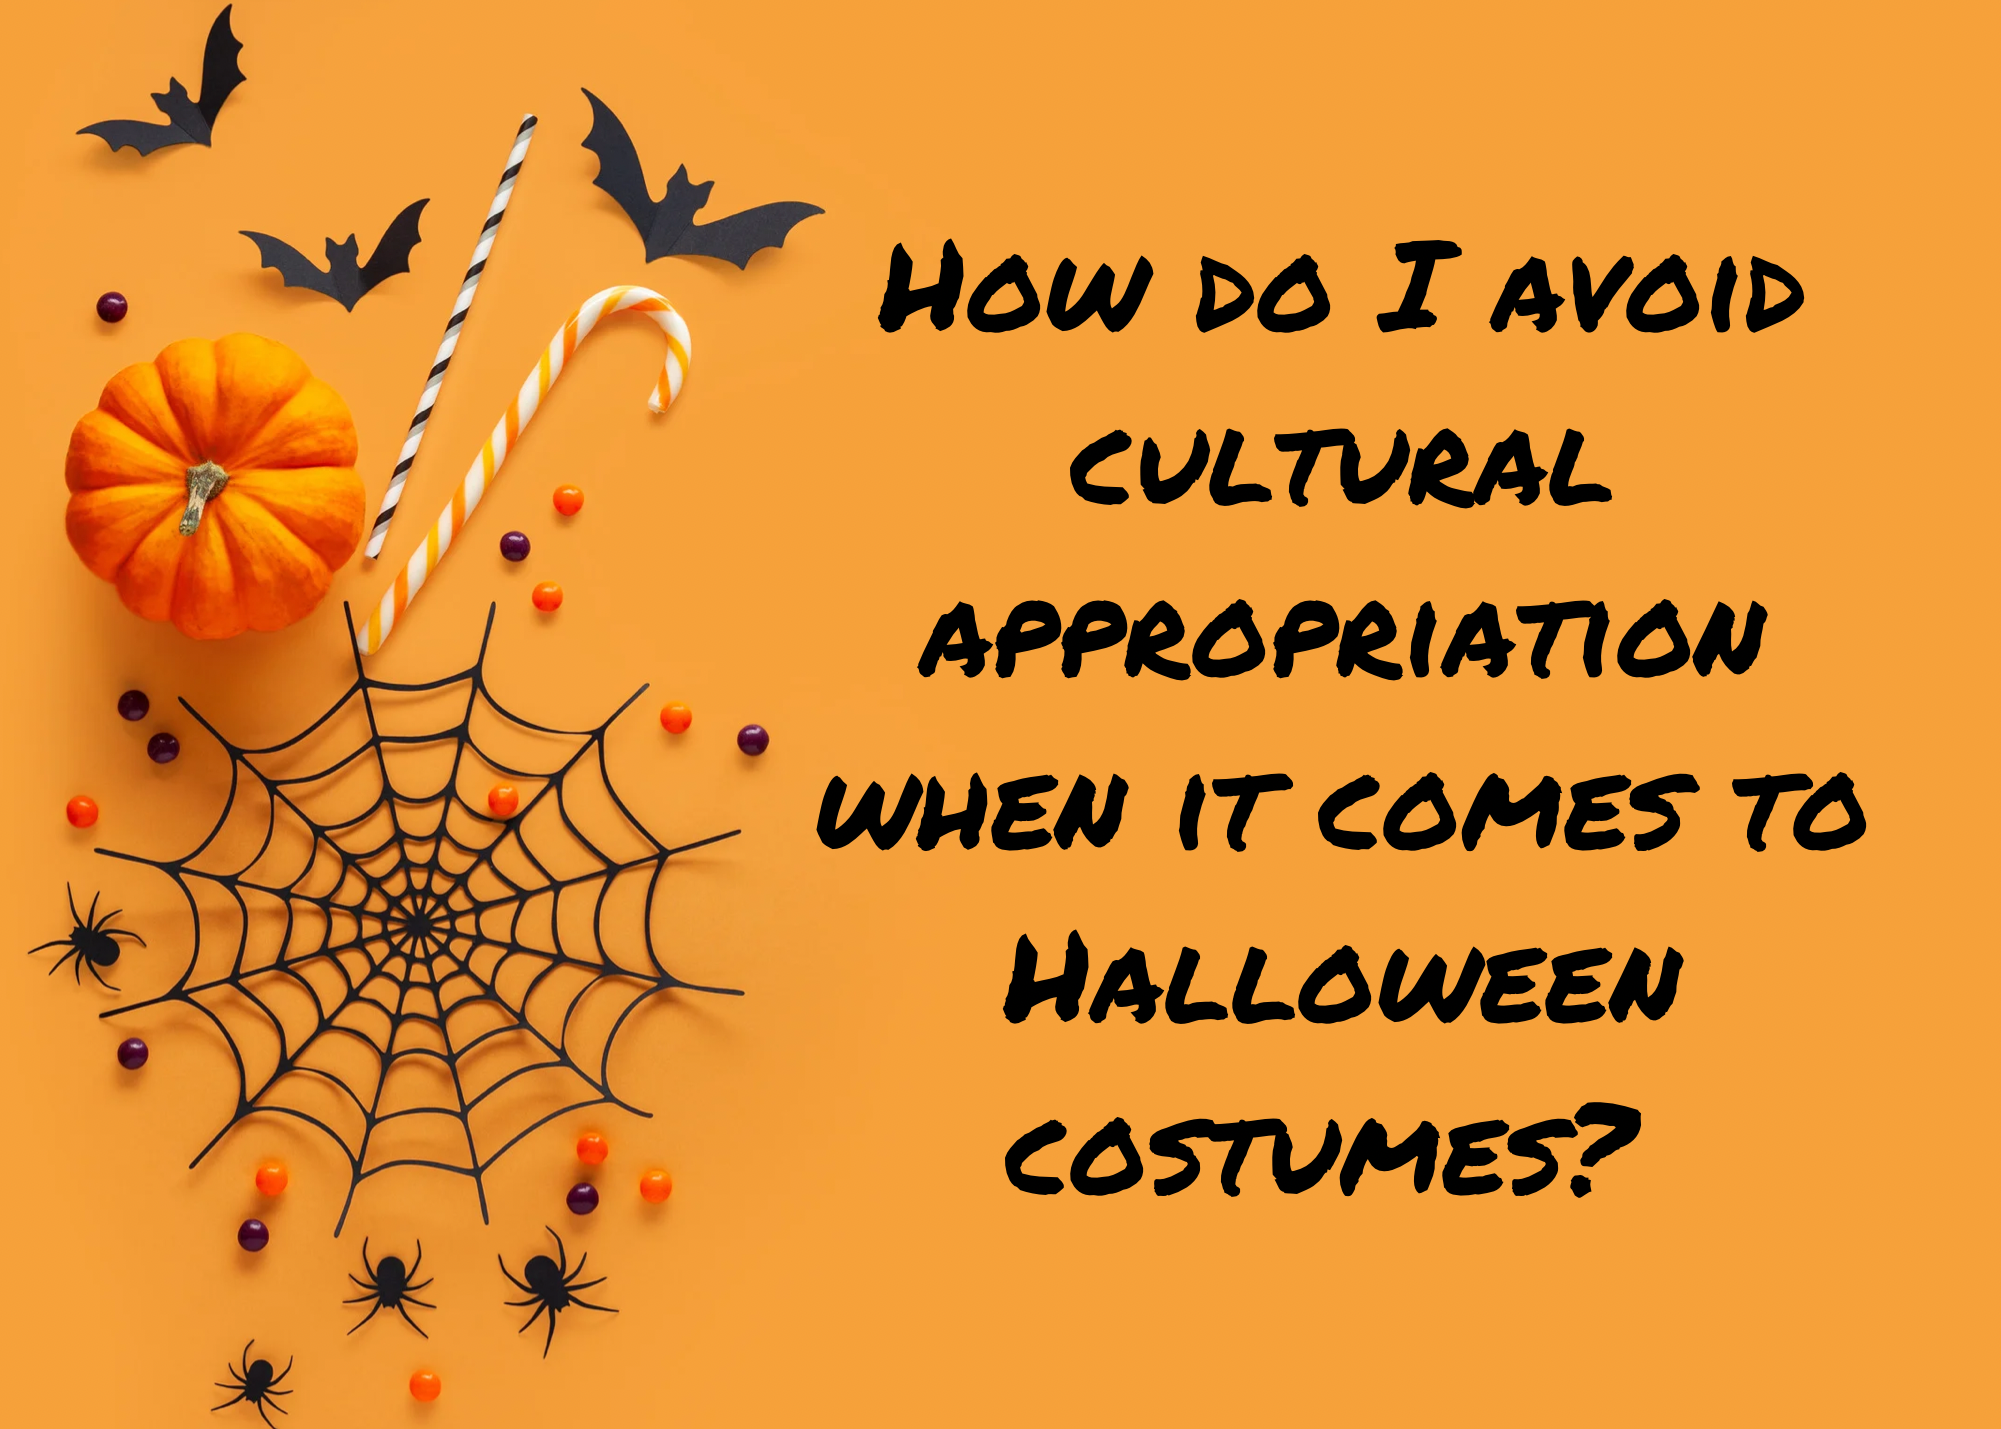 How Do I Avoid Cultural Appropriation When It Comes to Halloween Costumes? ￼